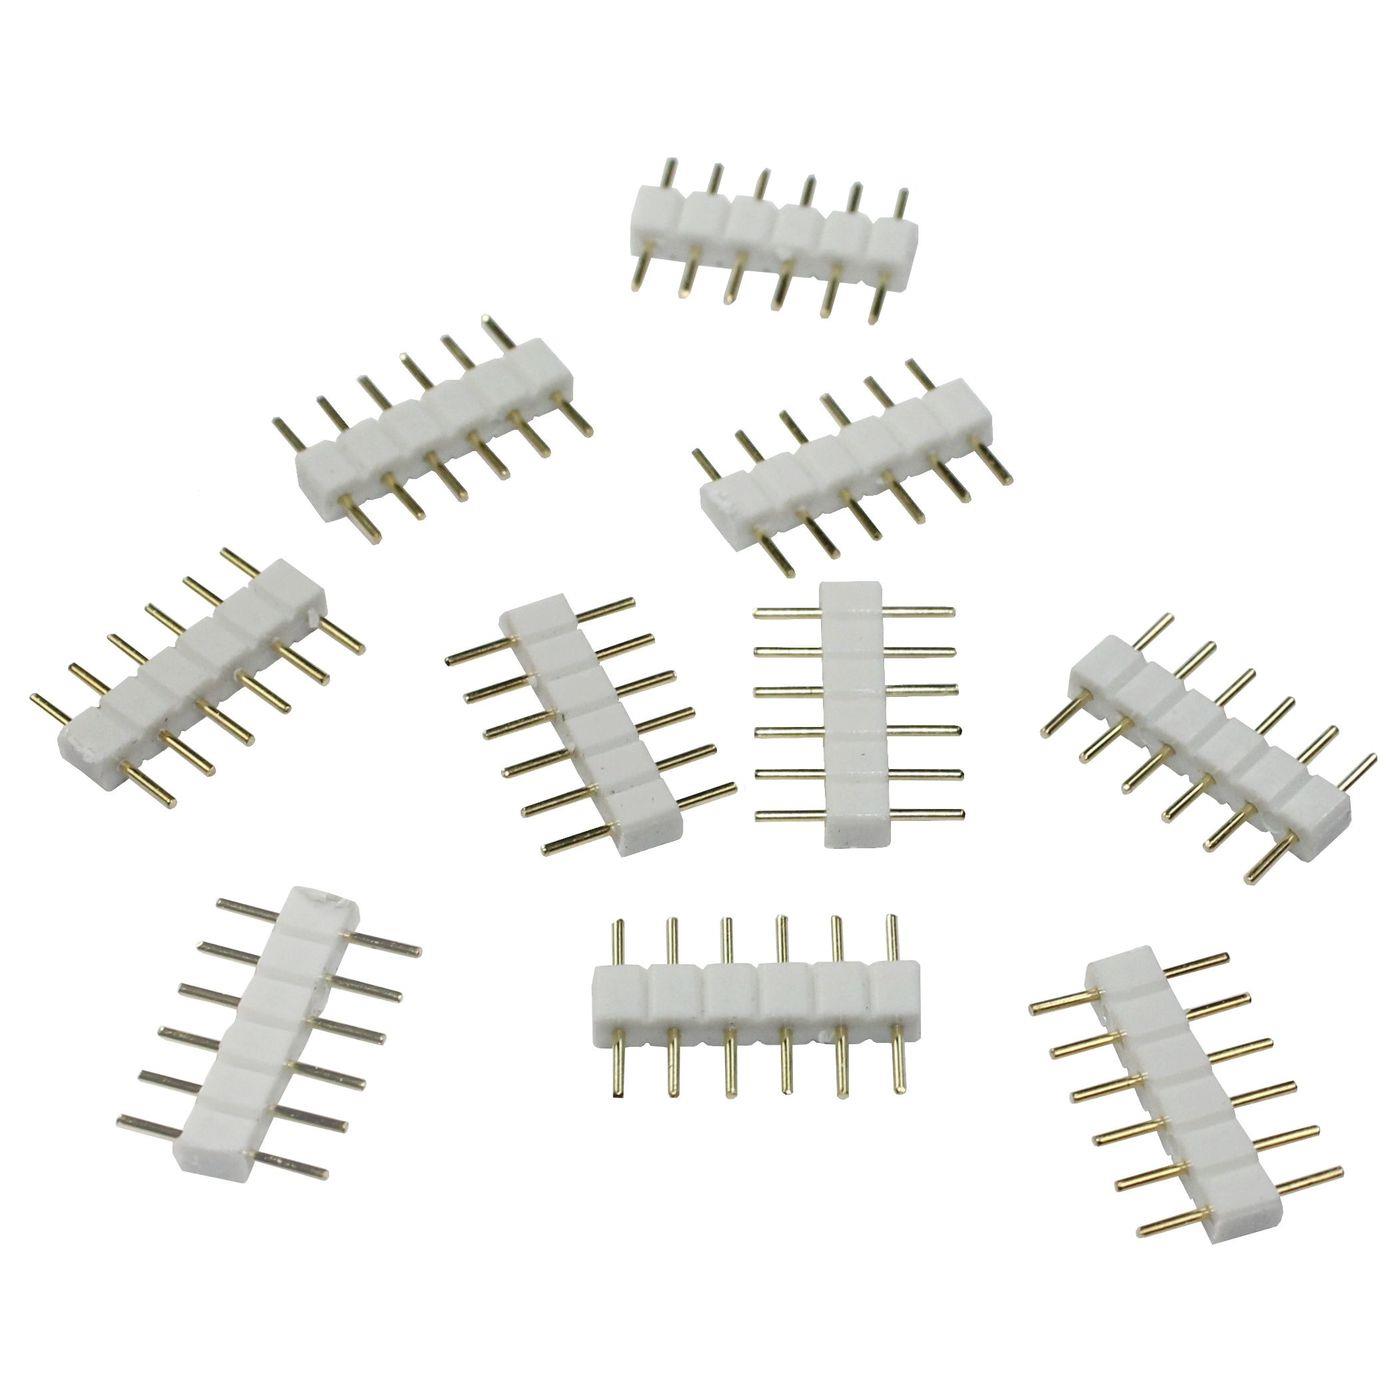 10x RGBW CCT LED Jumper 6 Pin Connector 15x3mm Adapter Coupling